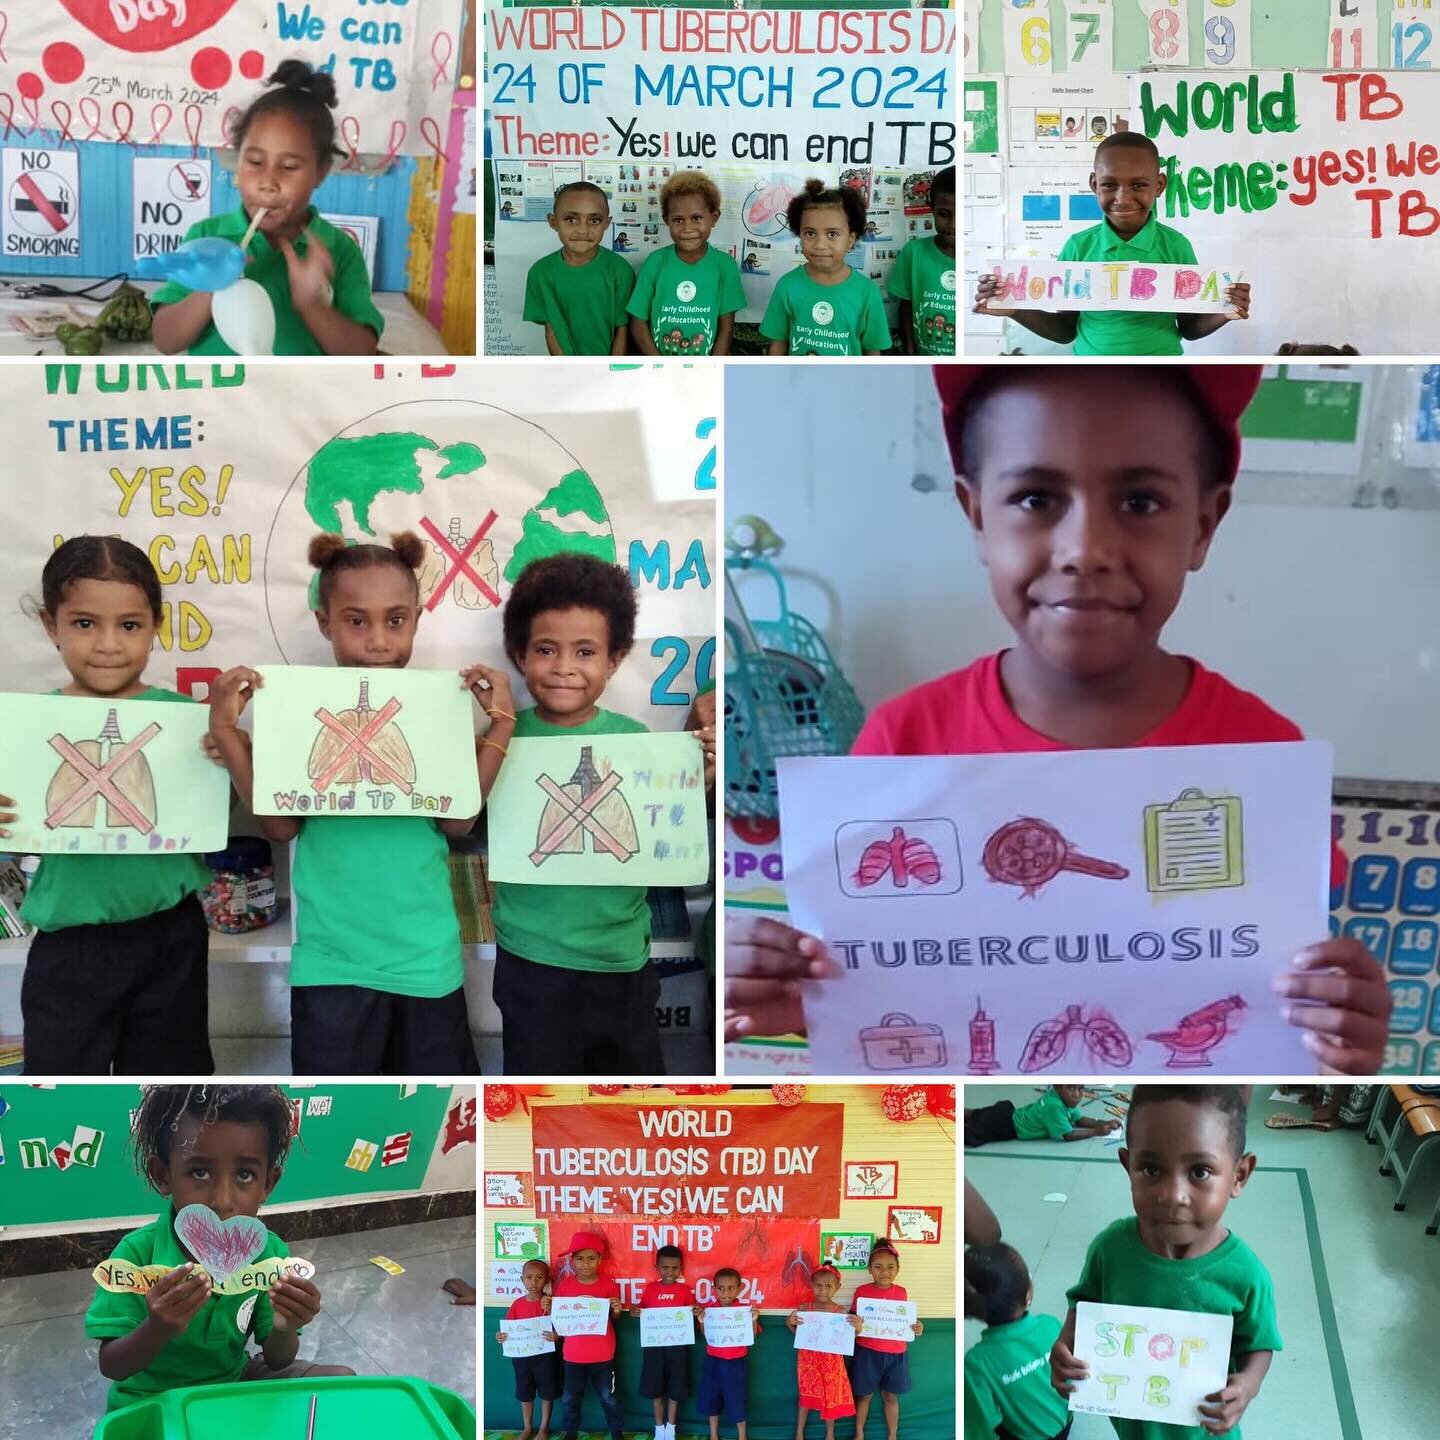 Our children are advocating to stop Tuberculosis and for it to come to an end. Too many young children still die in PNG from this preventable disease. Today, we have marked World Tuberculosis Day, a day where we unite in the fight against one of the 